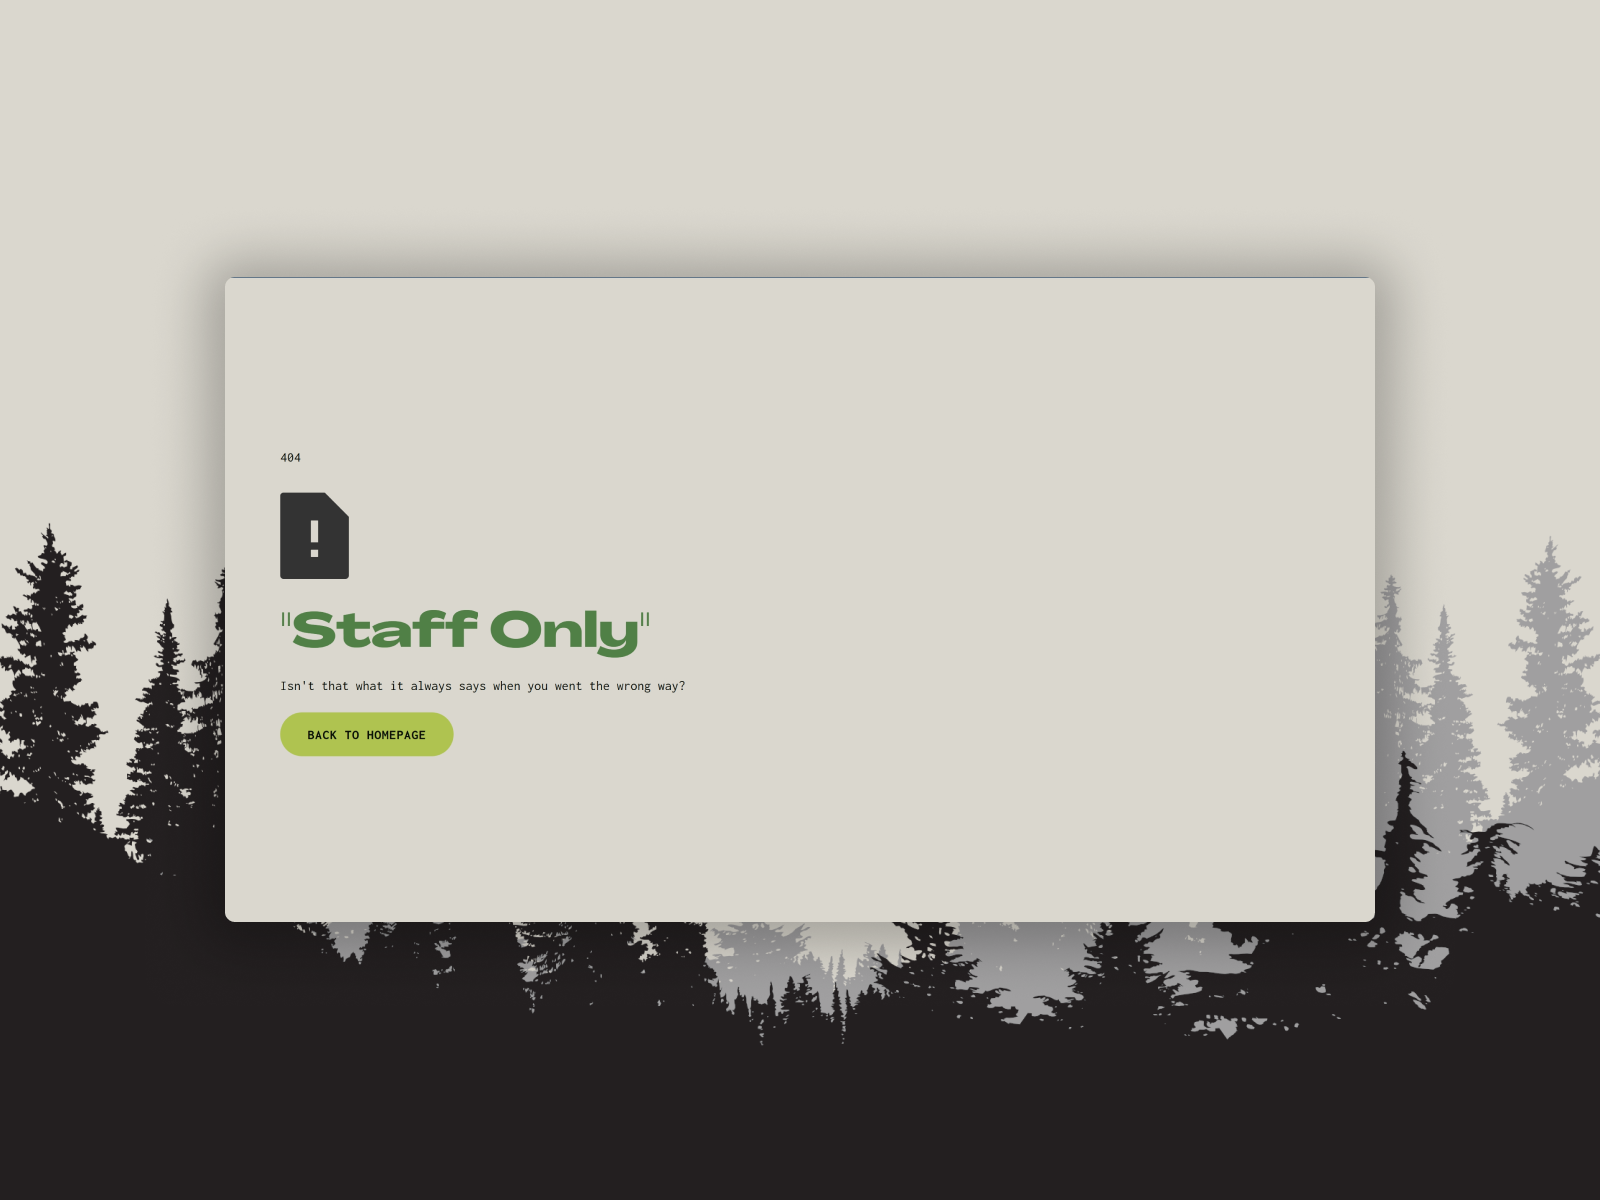 "Staff Only" 404 Page